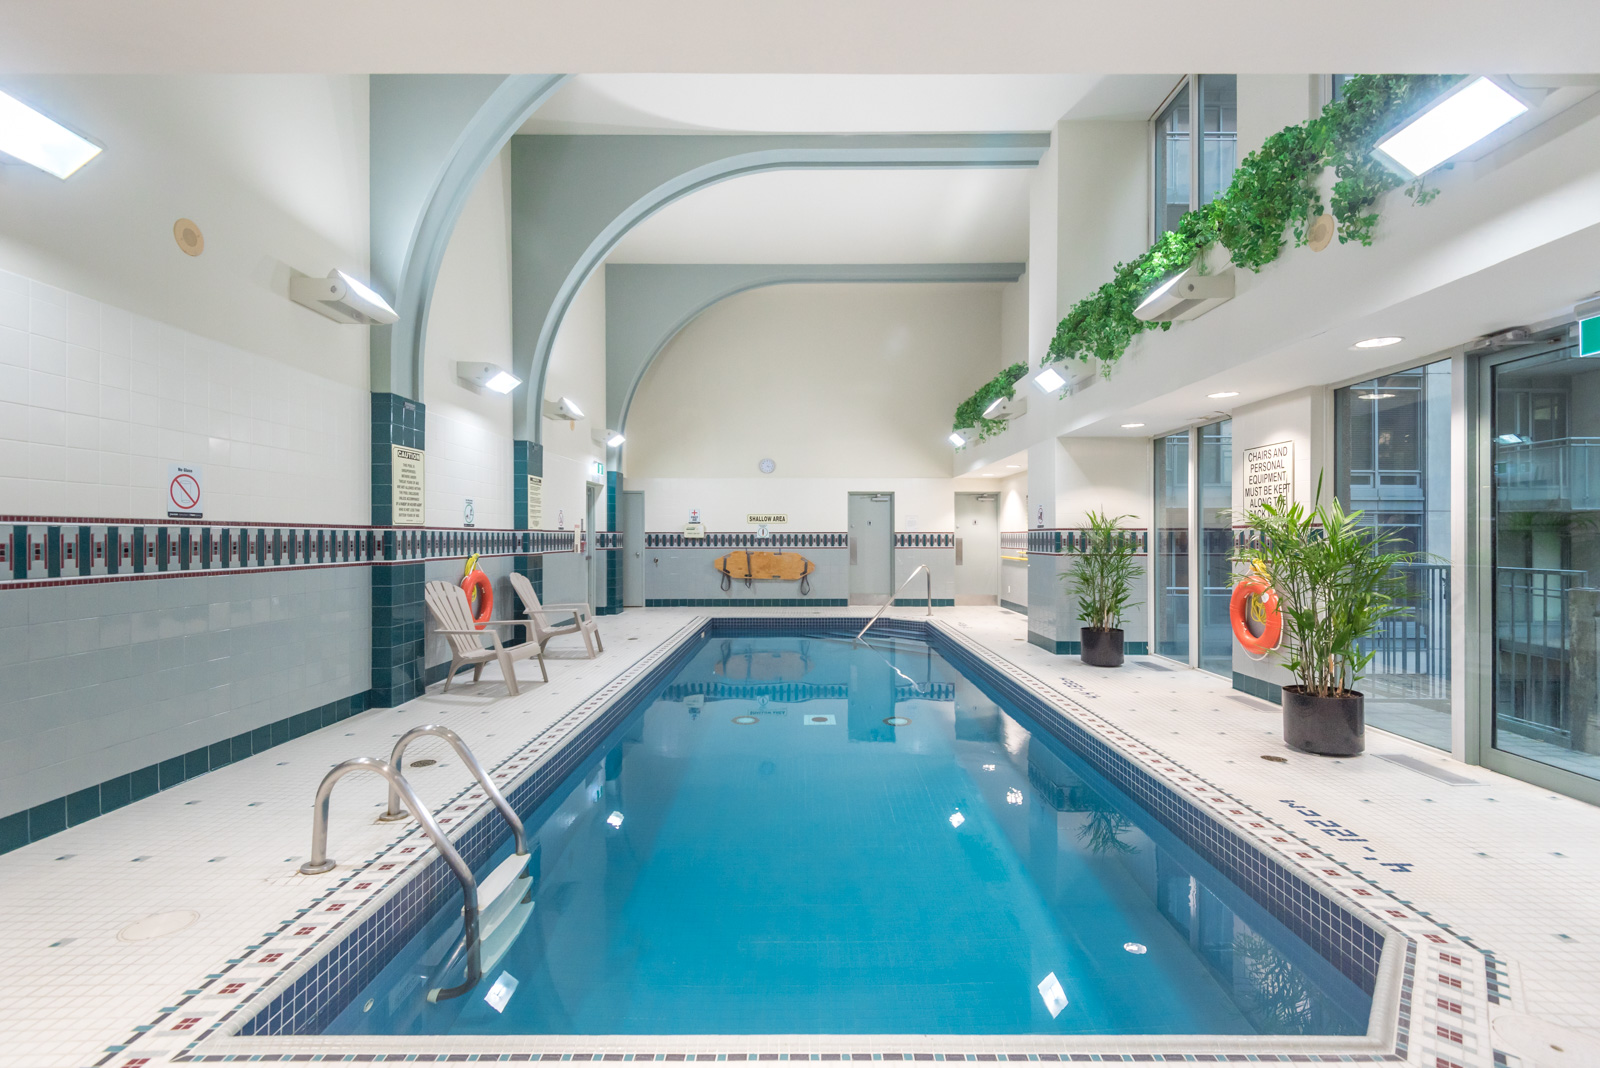 Gorgeous image of The Metropole's indoor pool. The water is so blue and deep.